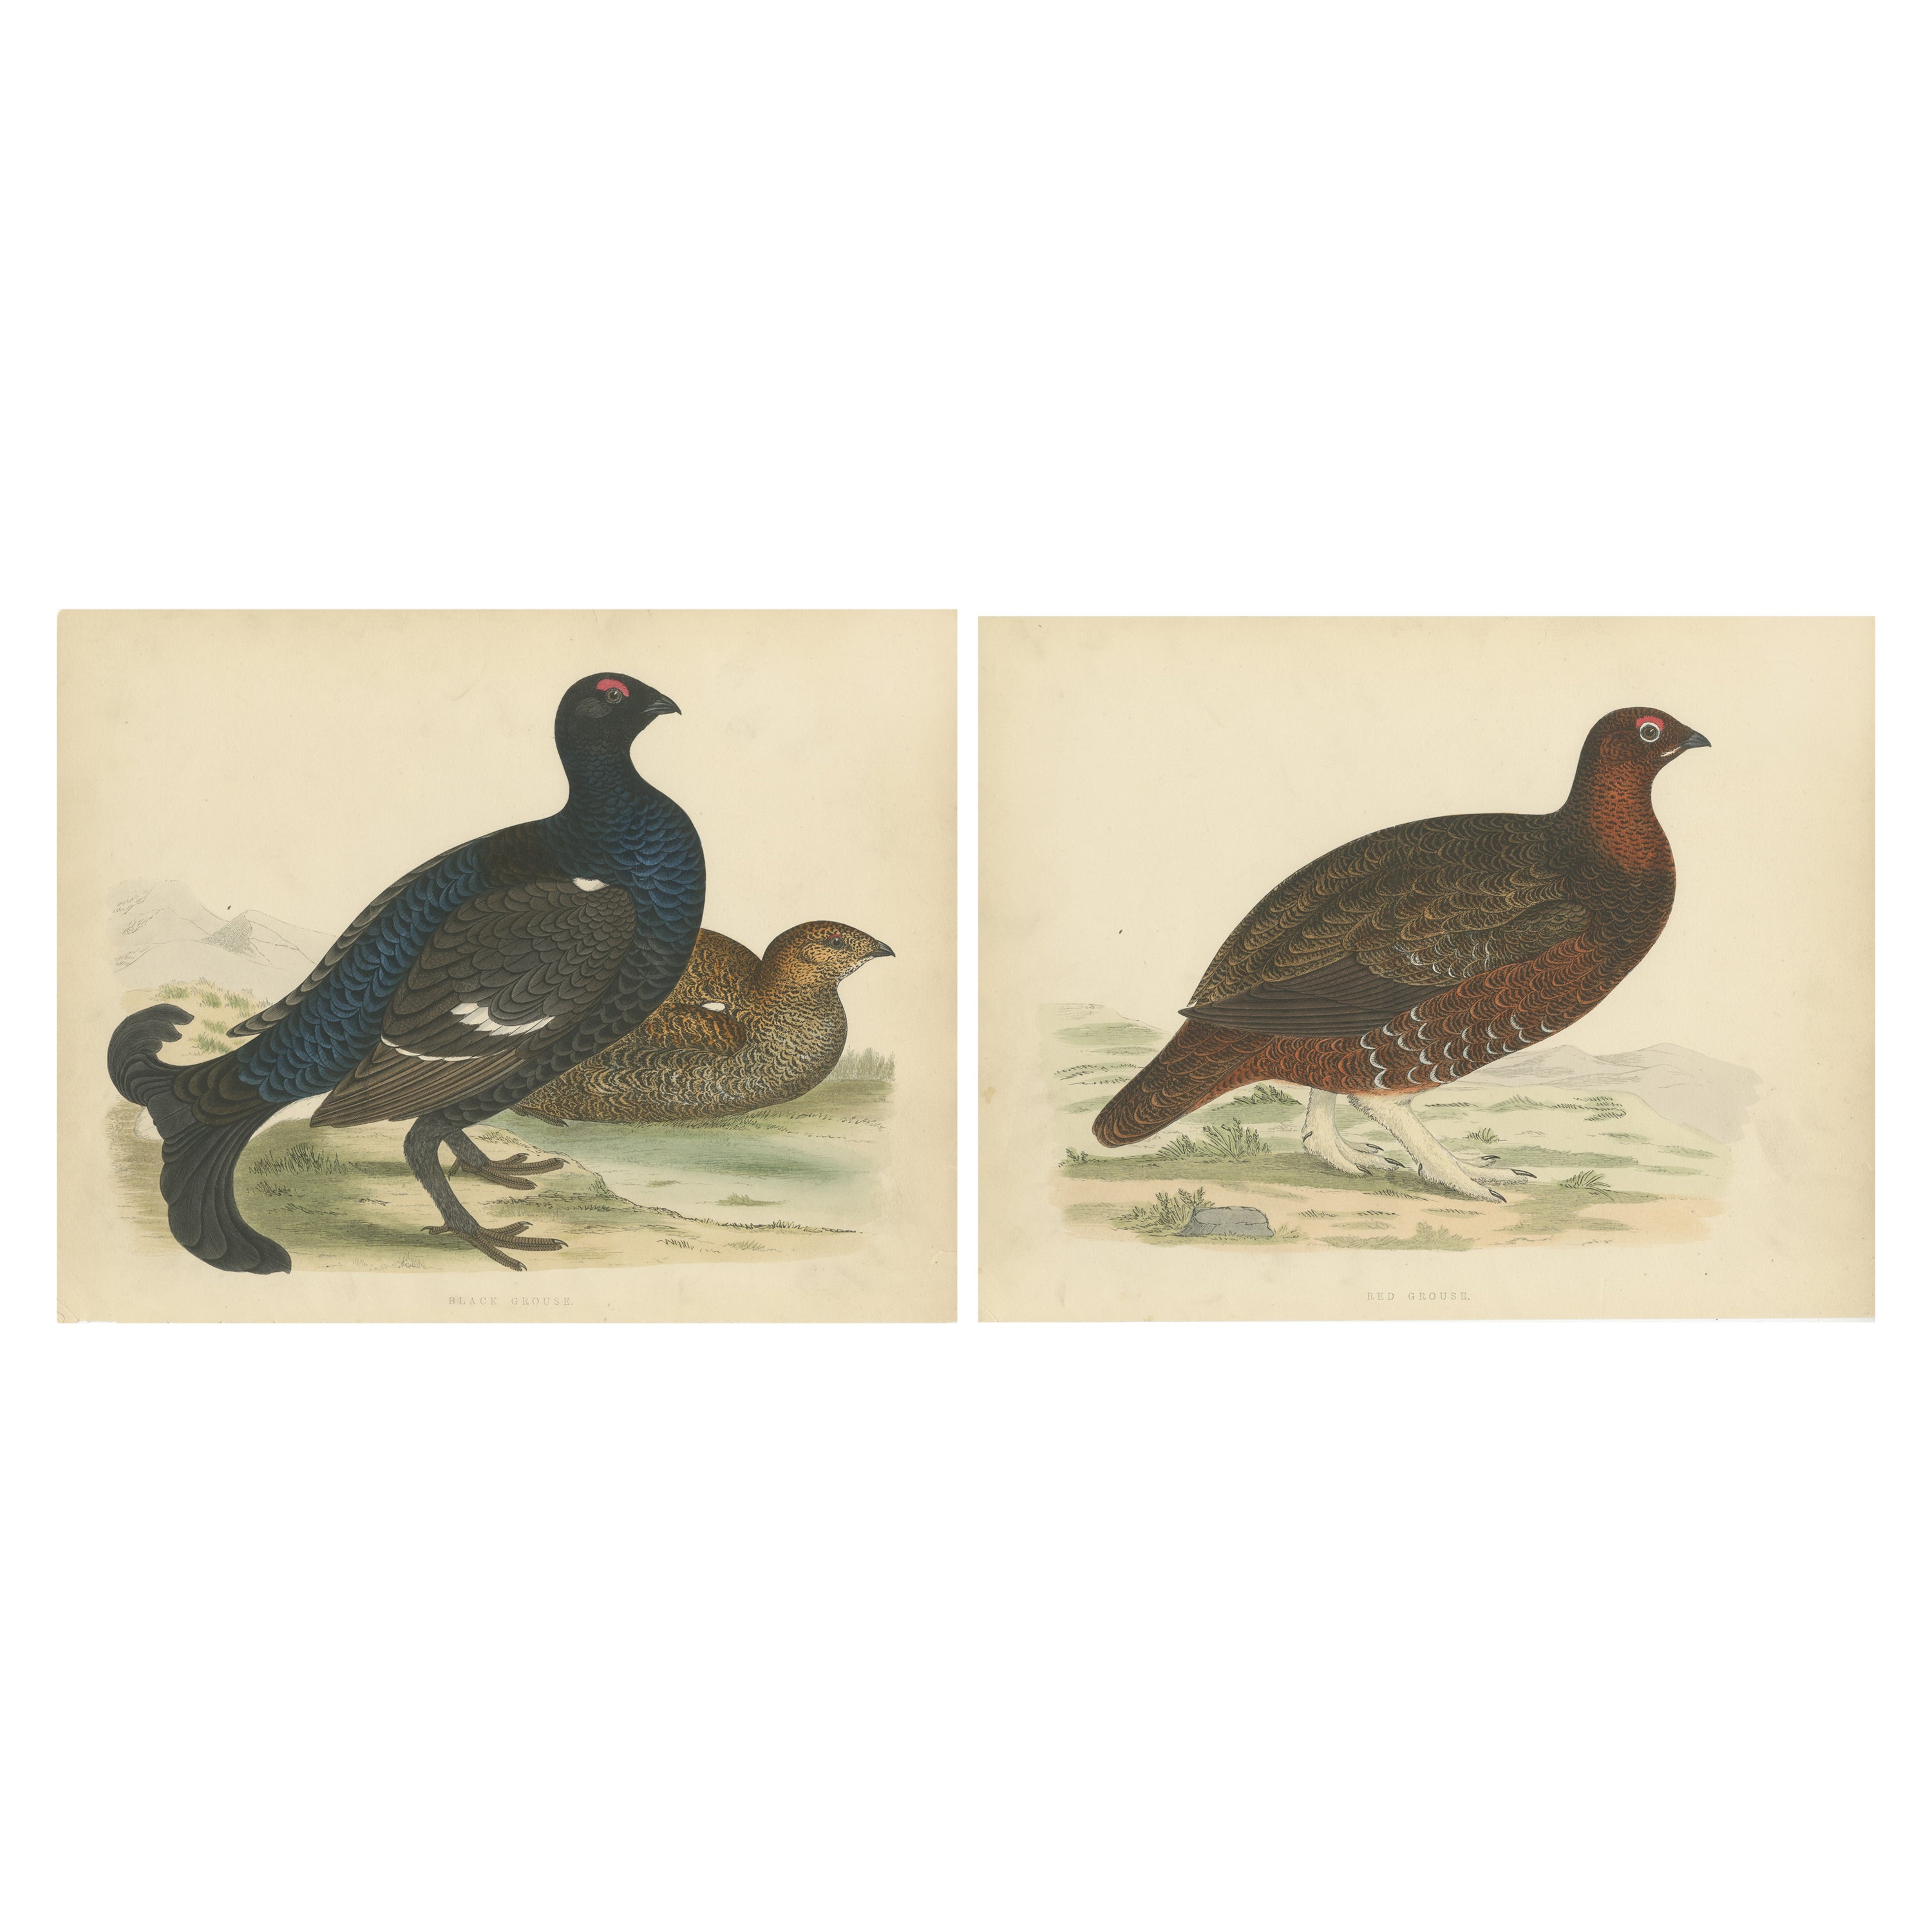 Set of 2 Antique Prints of a Black Grouse and Red Grouse